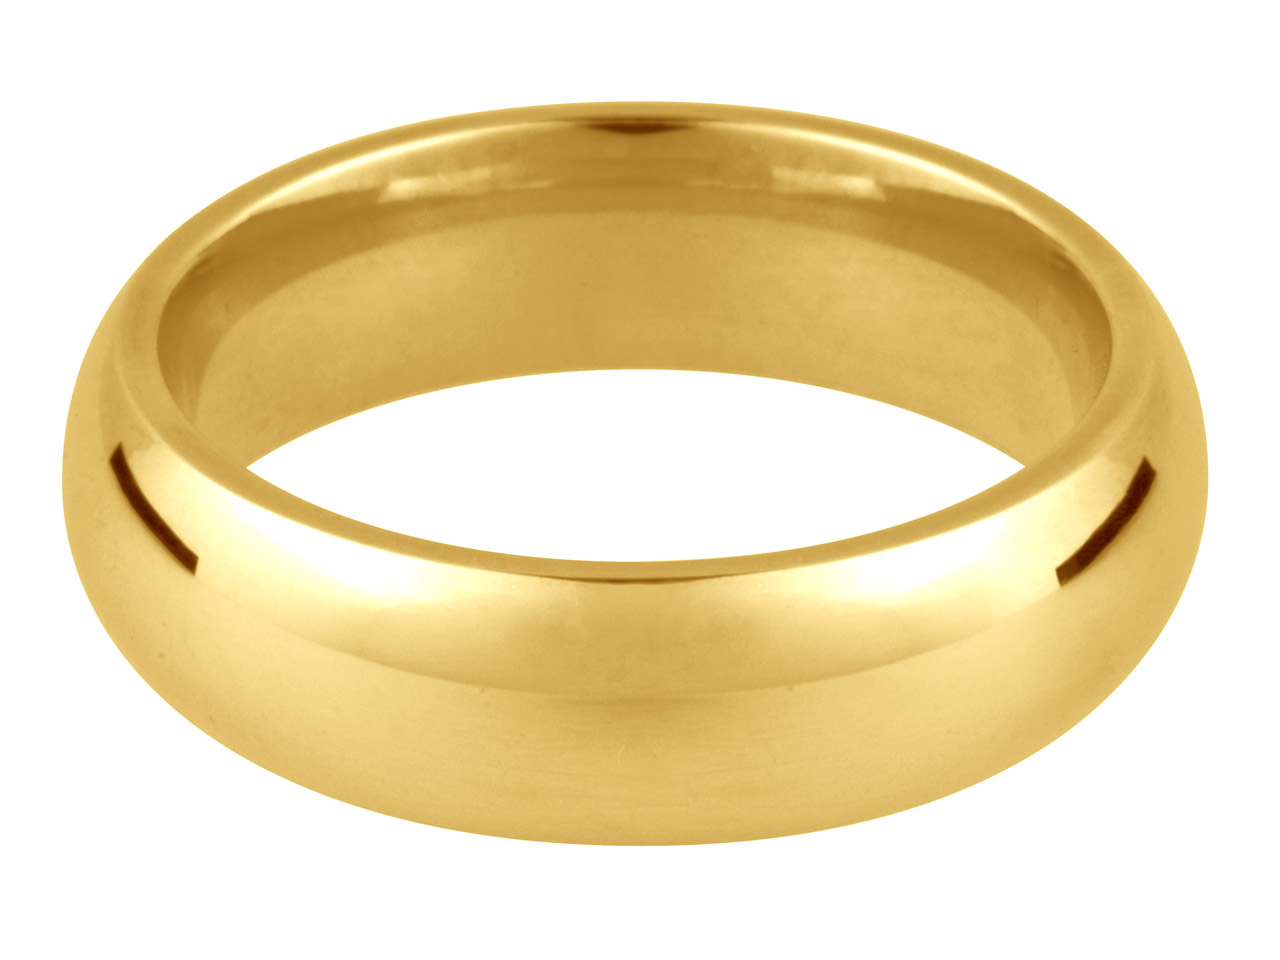 18ct Yellow Gold Court Wedding Ring 2.5mm, Size P, 3.4g Medium Weight,  Hallmarked, Wall Thickness 1.50mm,  100% Recycled Gold